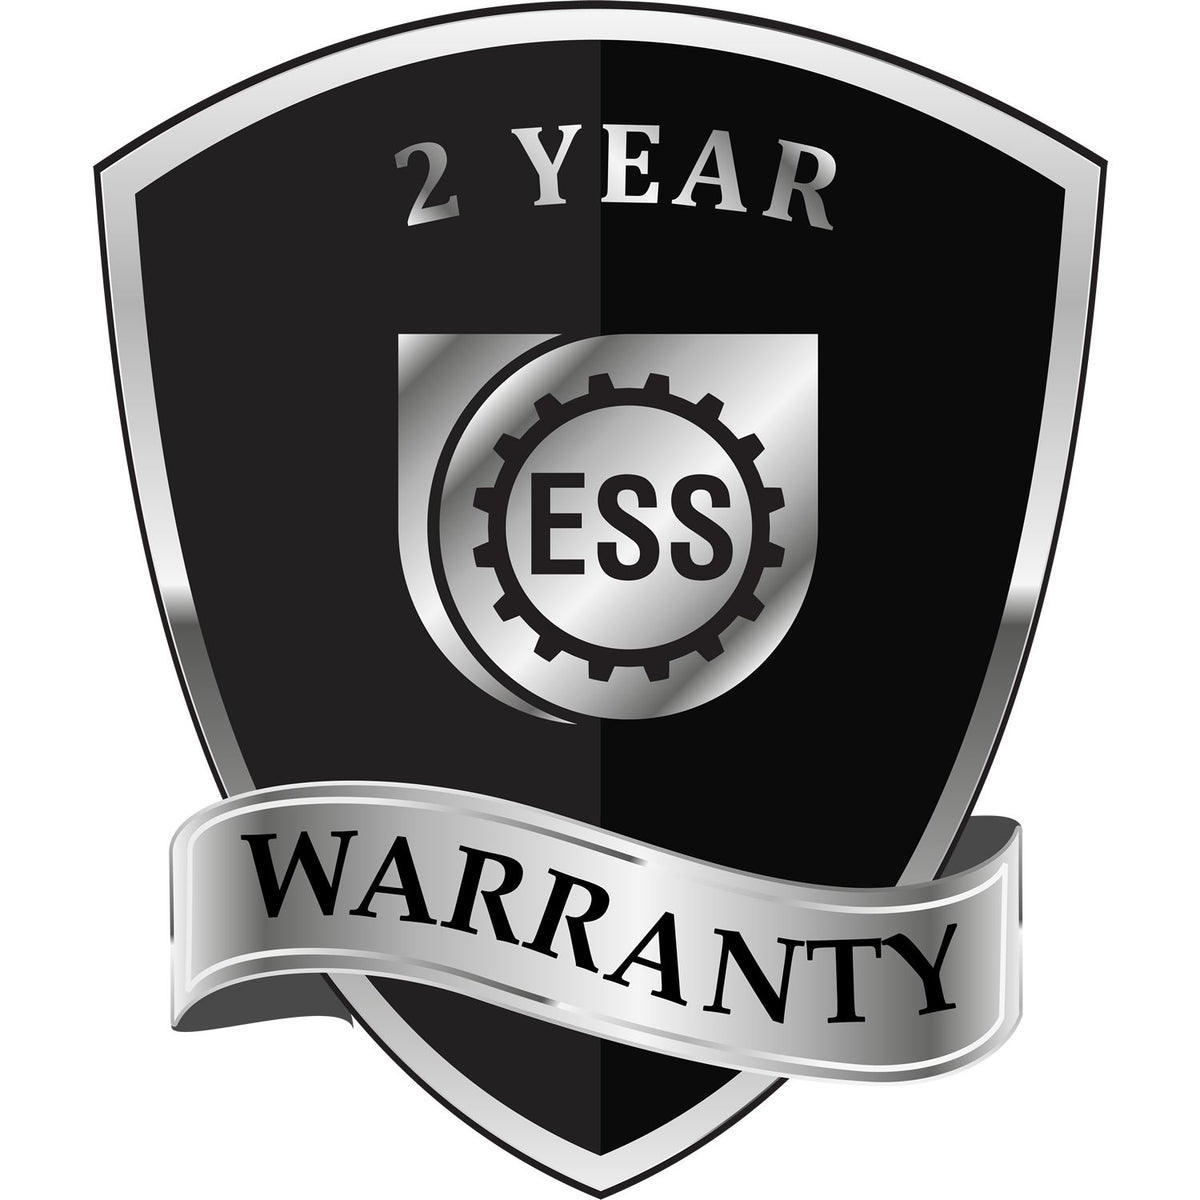 A black and silver badge or emblem showing warranty information for the State of Arizona Extended Long Reach Geologist Seal